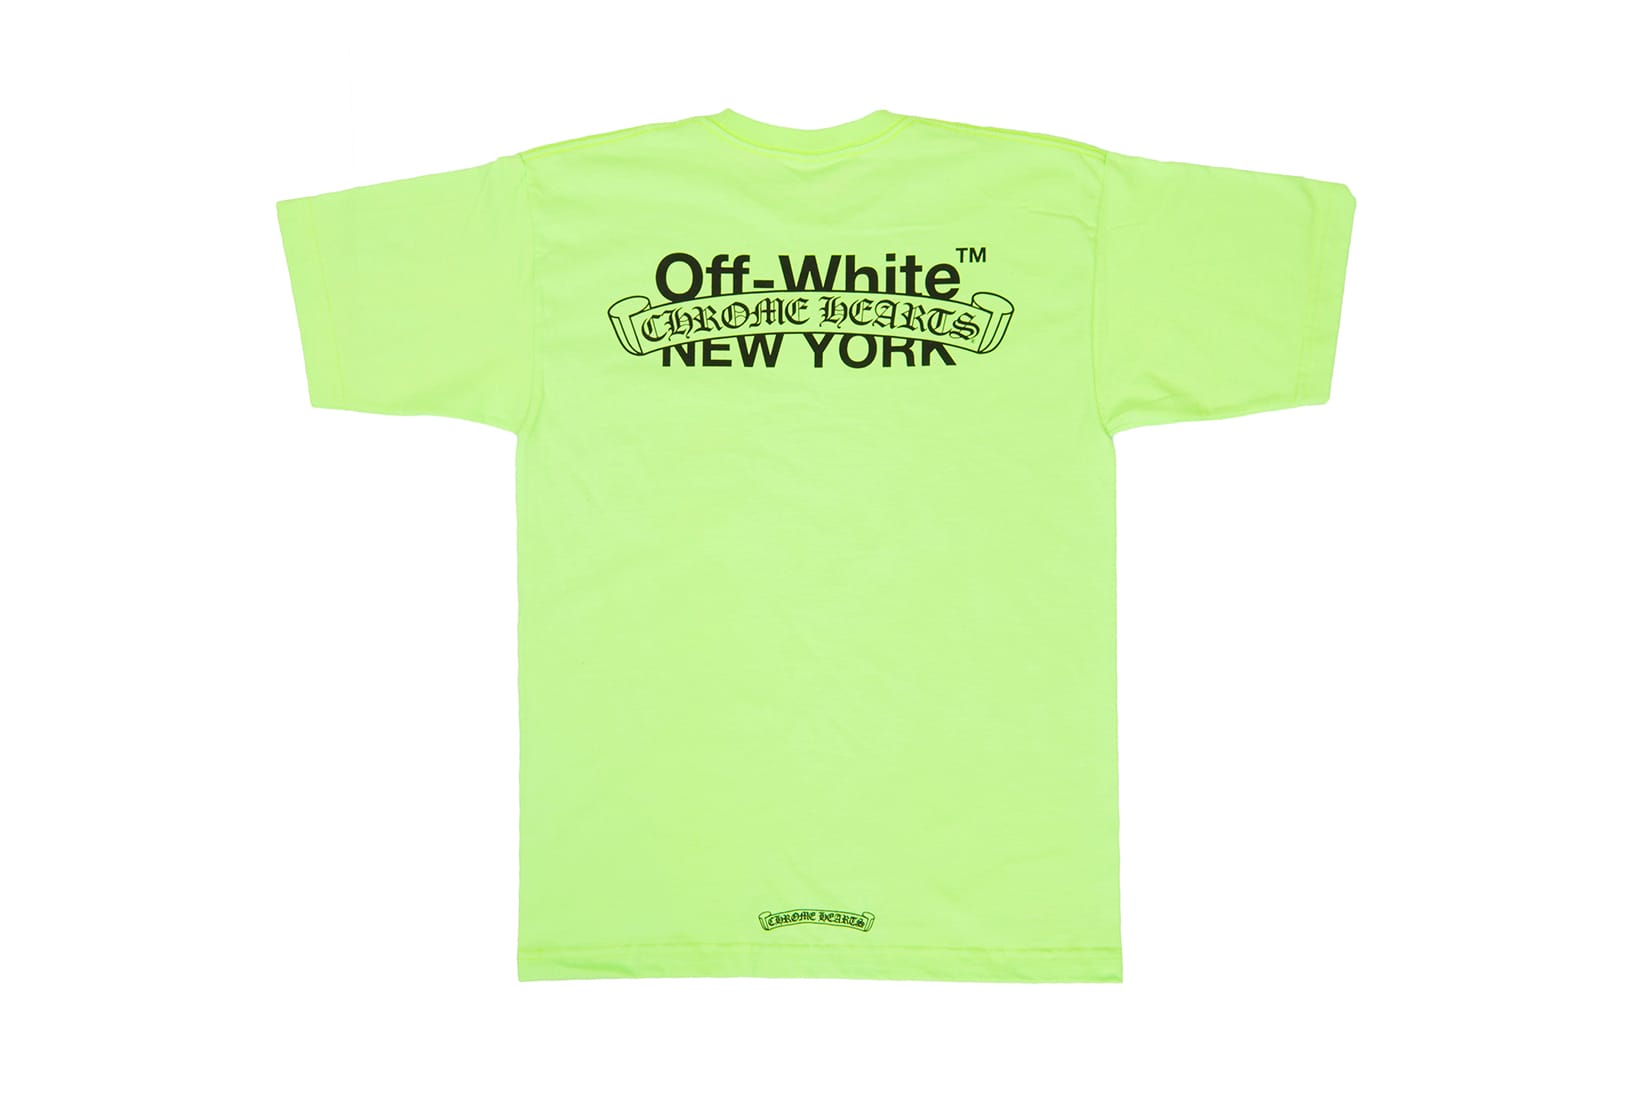 OFF-WHITE x Chrome Hearts Limited Edition T-Shirt Capsule | Hypebeast